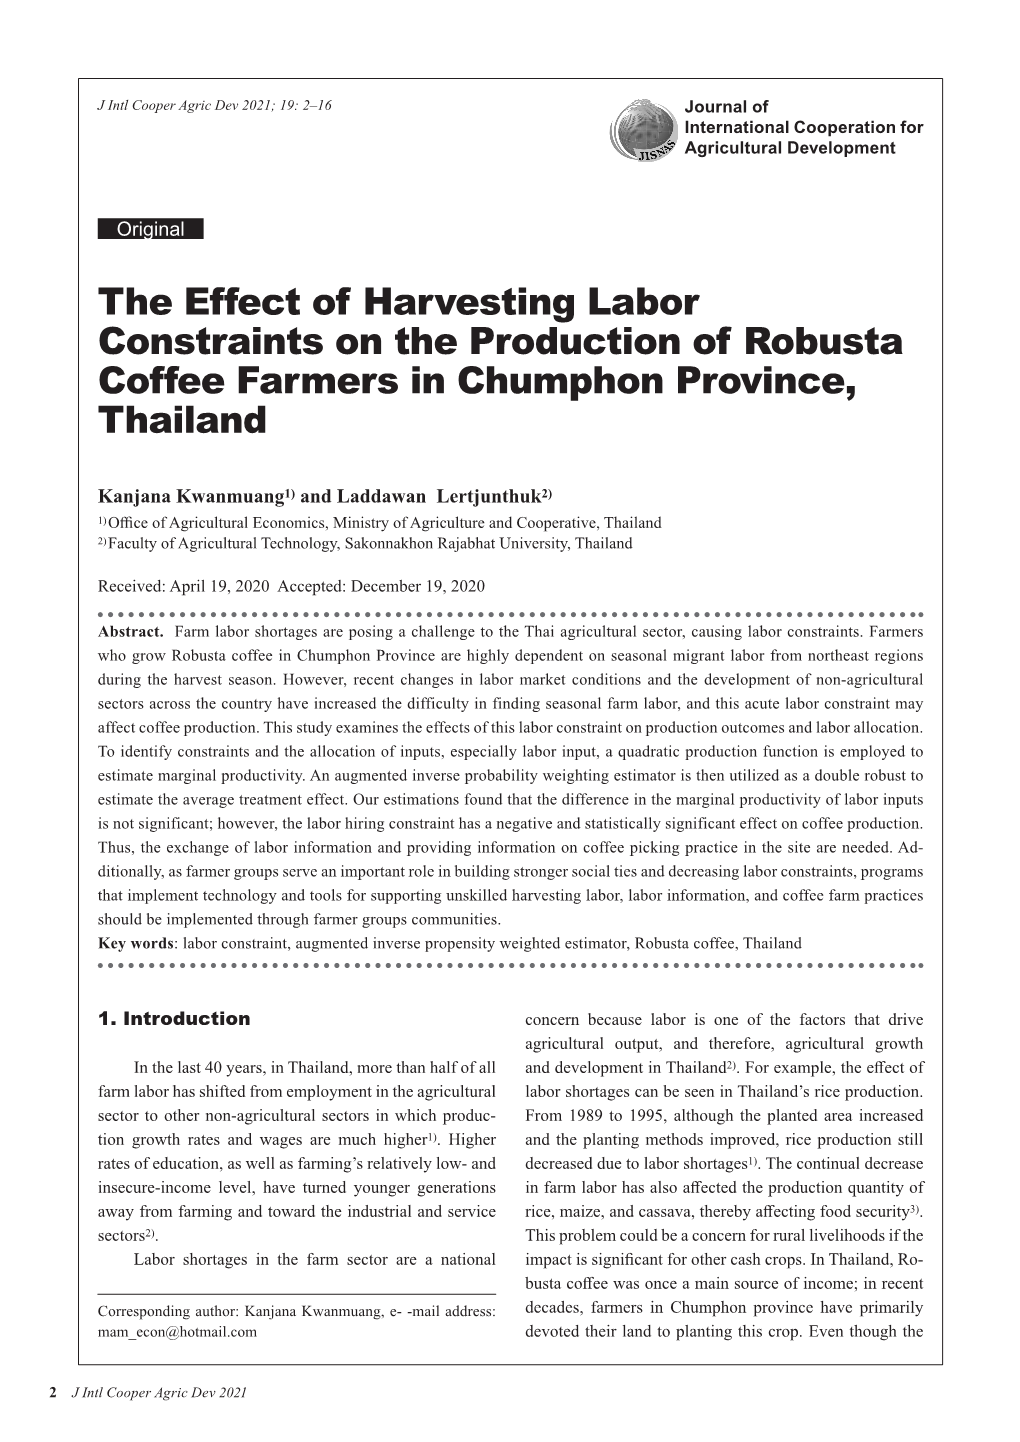 The Effect of Harvesting Labor Constraints on the Production of Robusta Coffee Farmers in Chumphon Province, Thailand